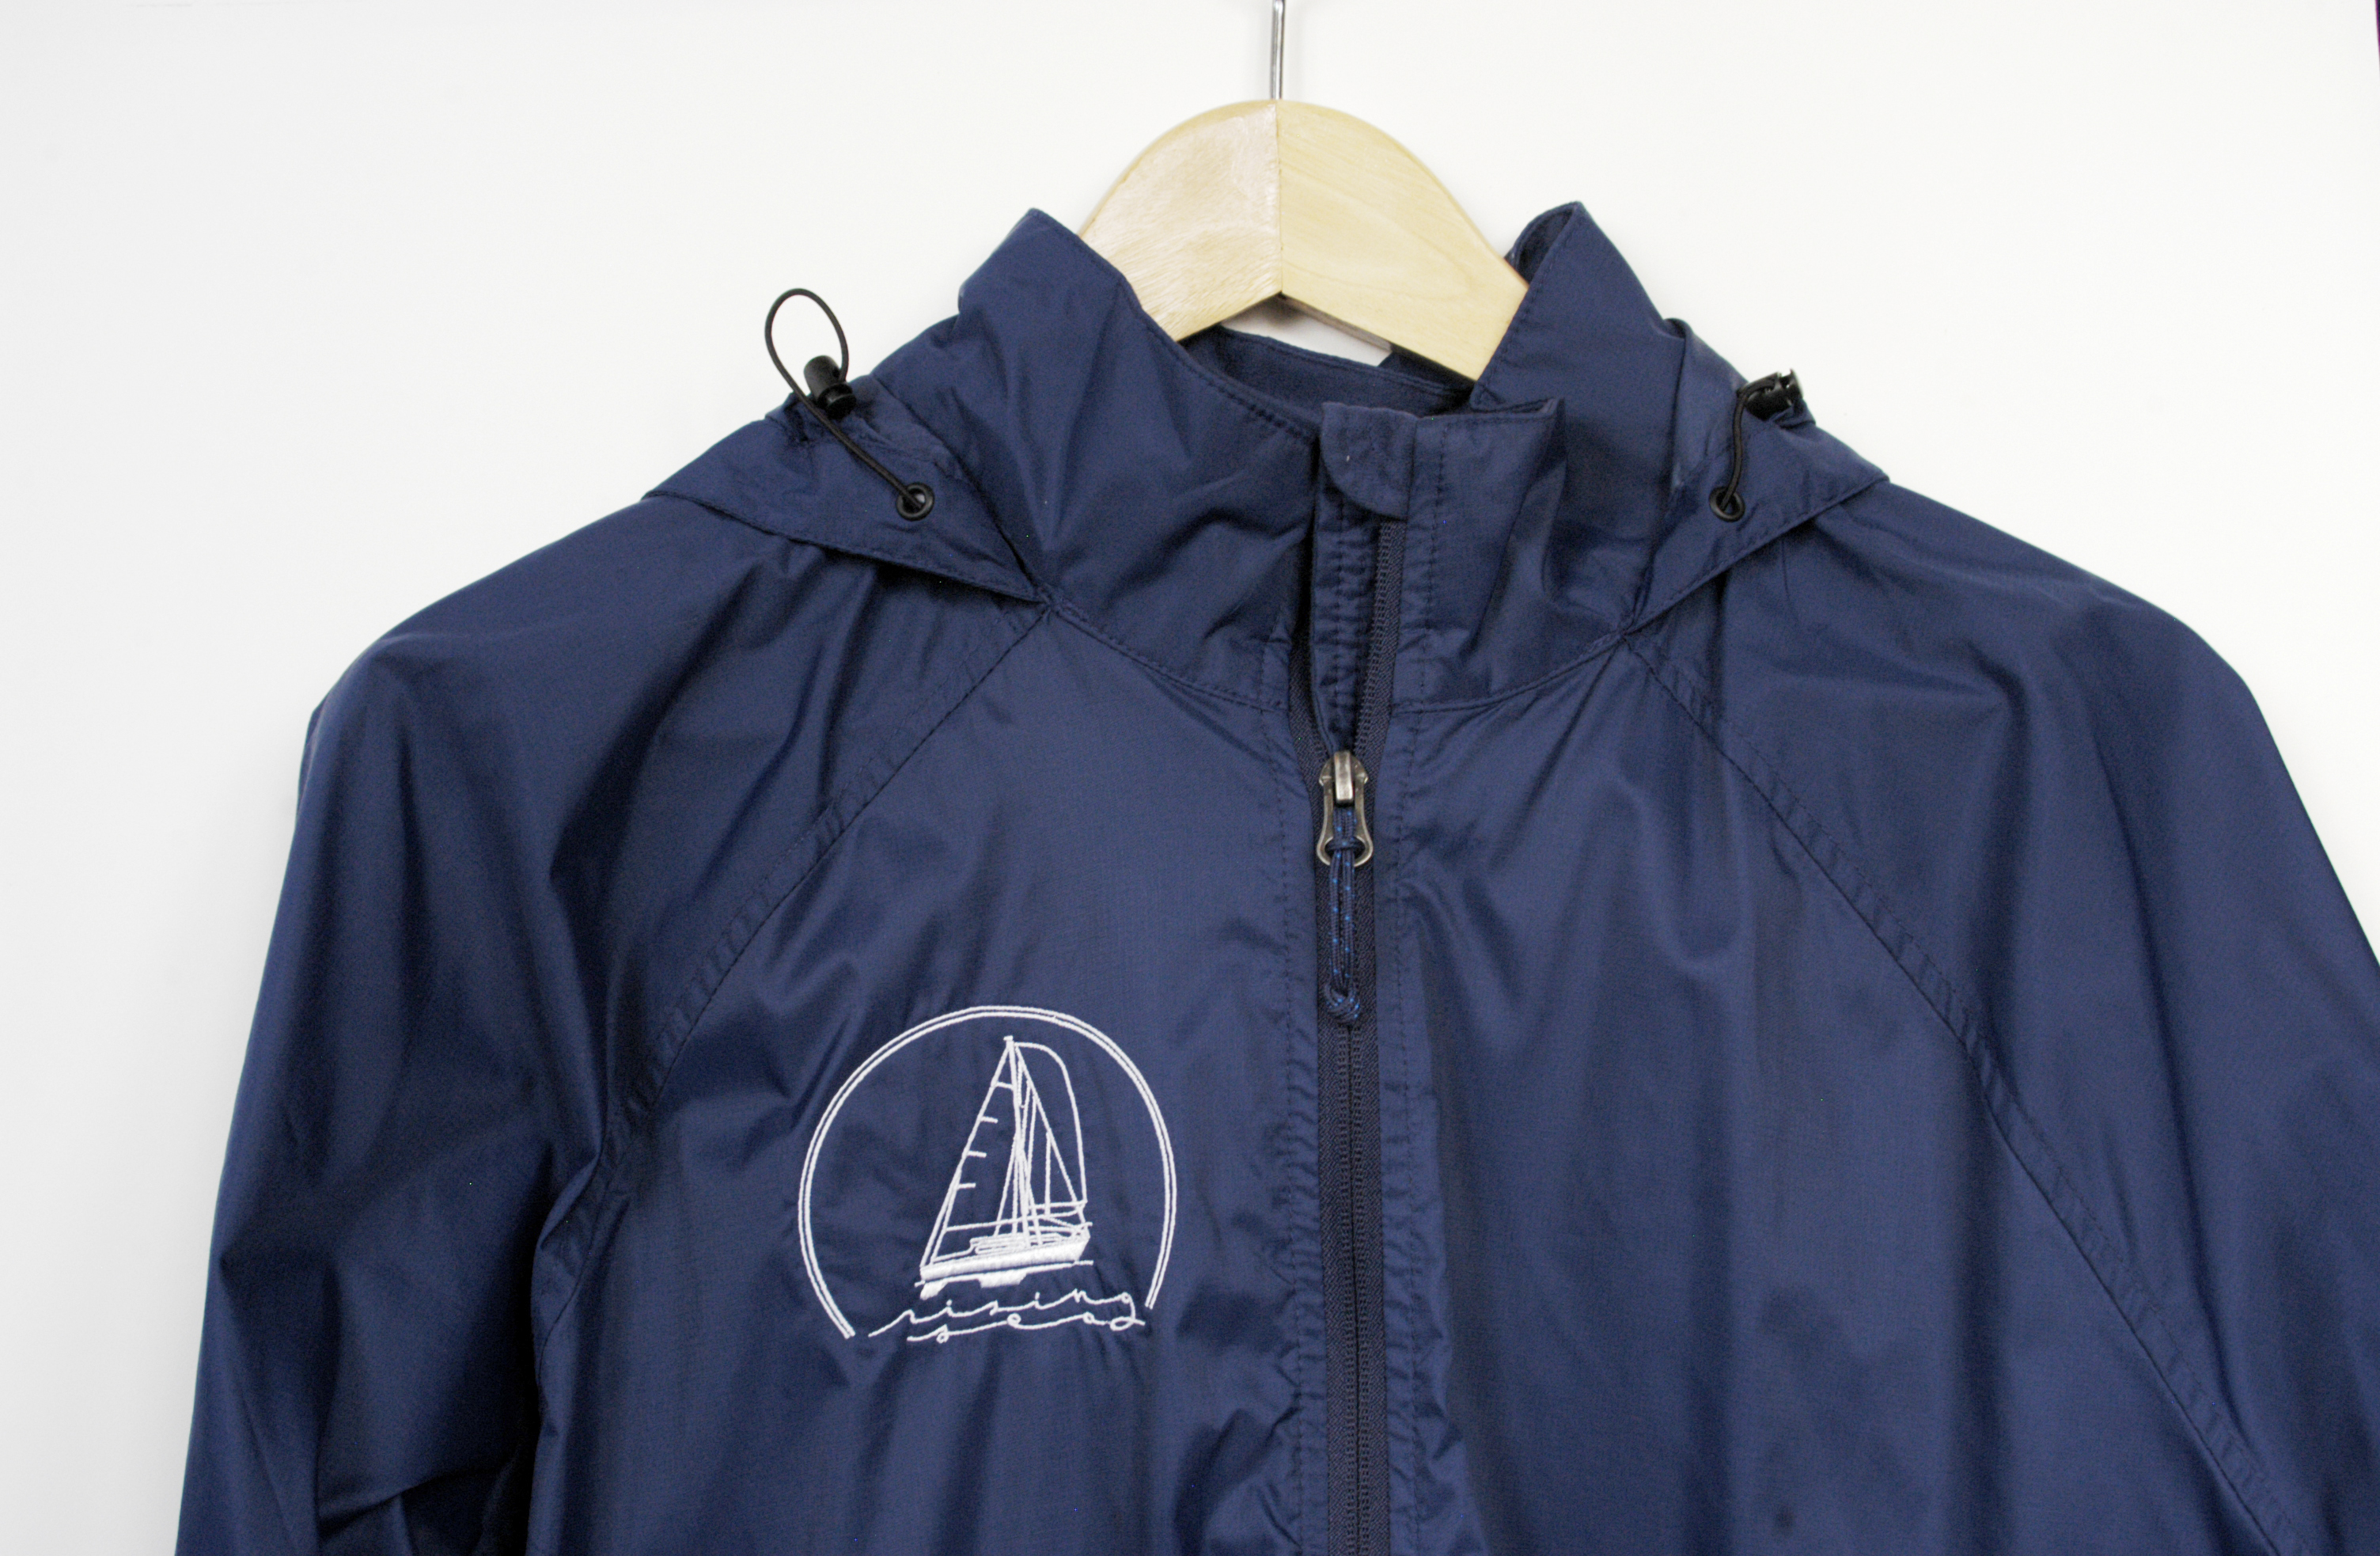 Windbreaker with embroidered boat logo